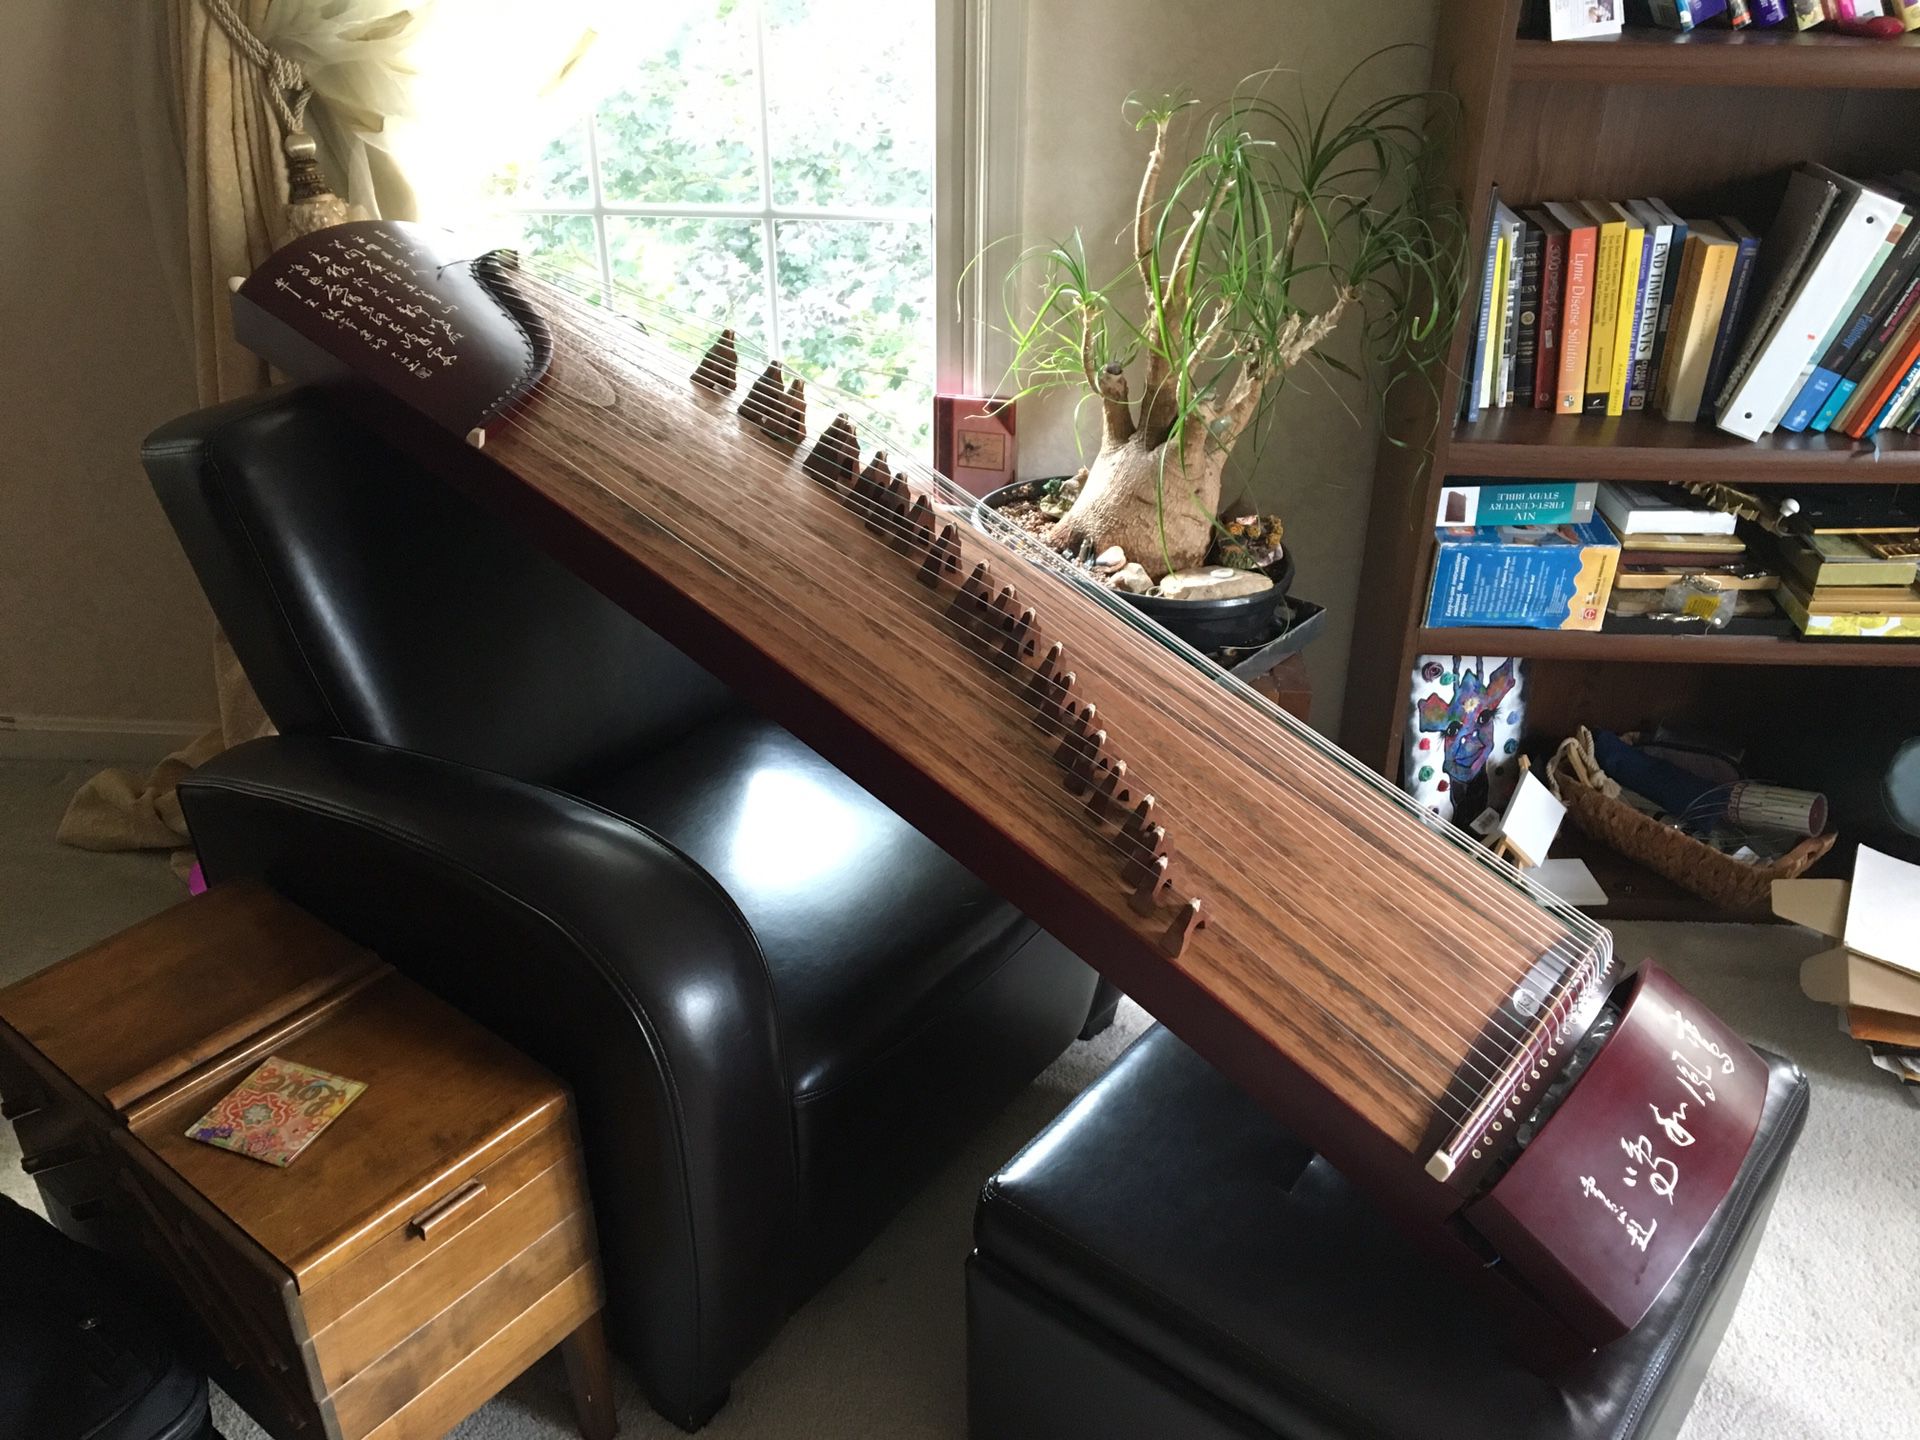 21 String!! Traditional Japanese Koto/Kin/Zither instrument